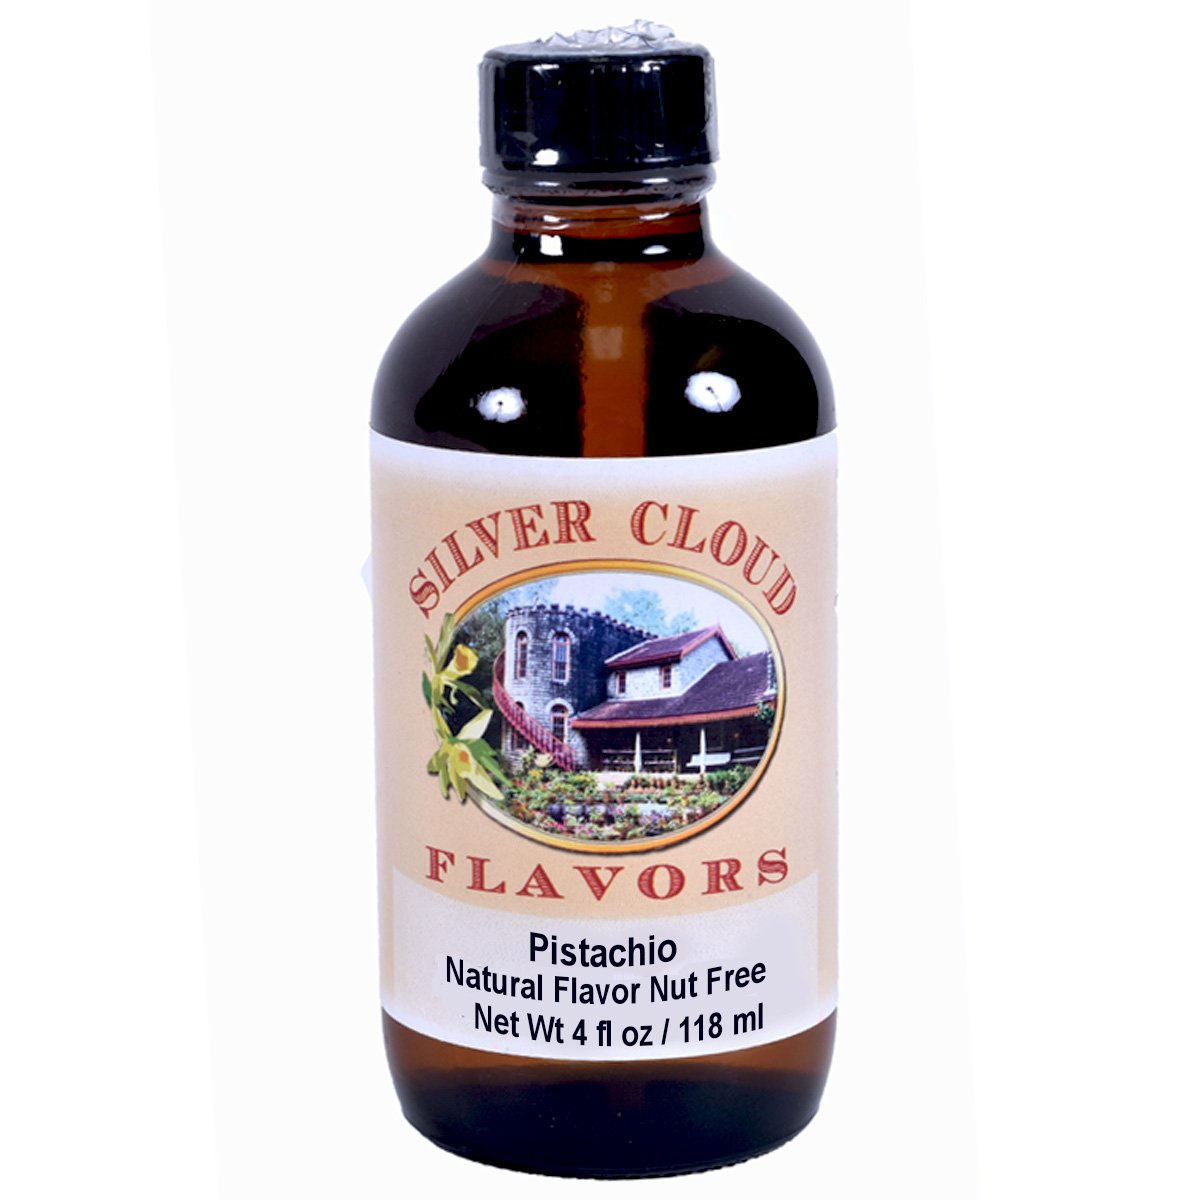 Pistachio, Natural Flavor Blend Nut Free Silver Cloud Extract - Bake Supply Plus